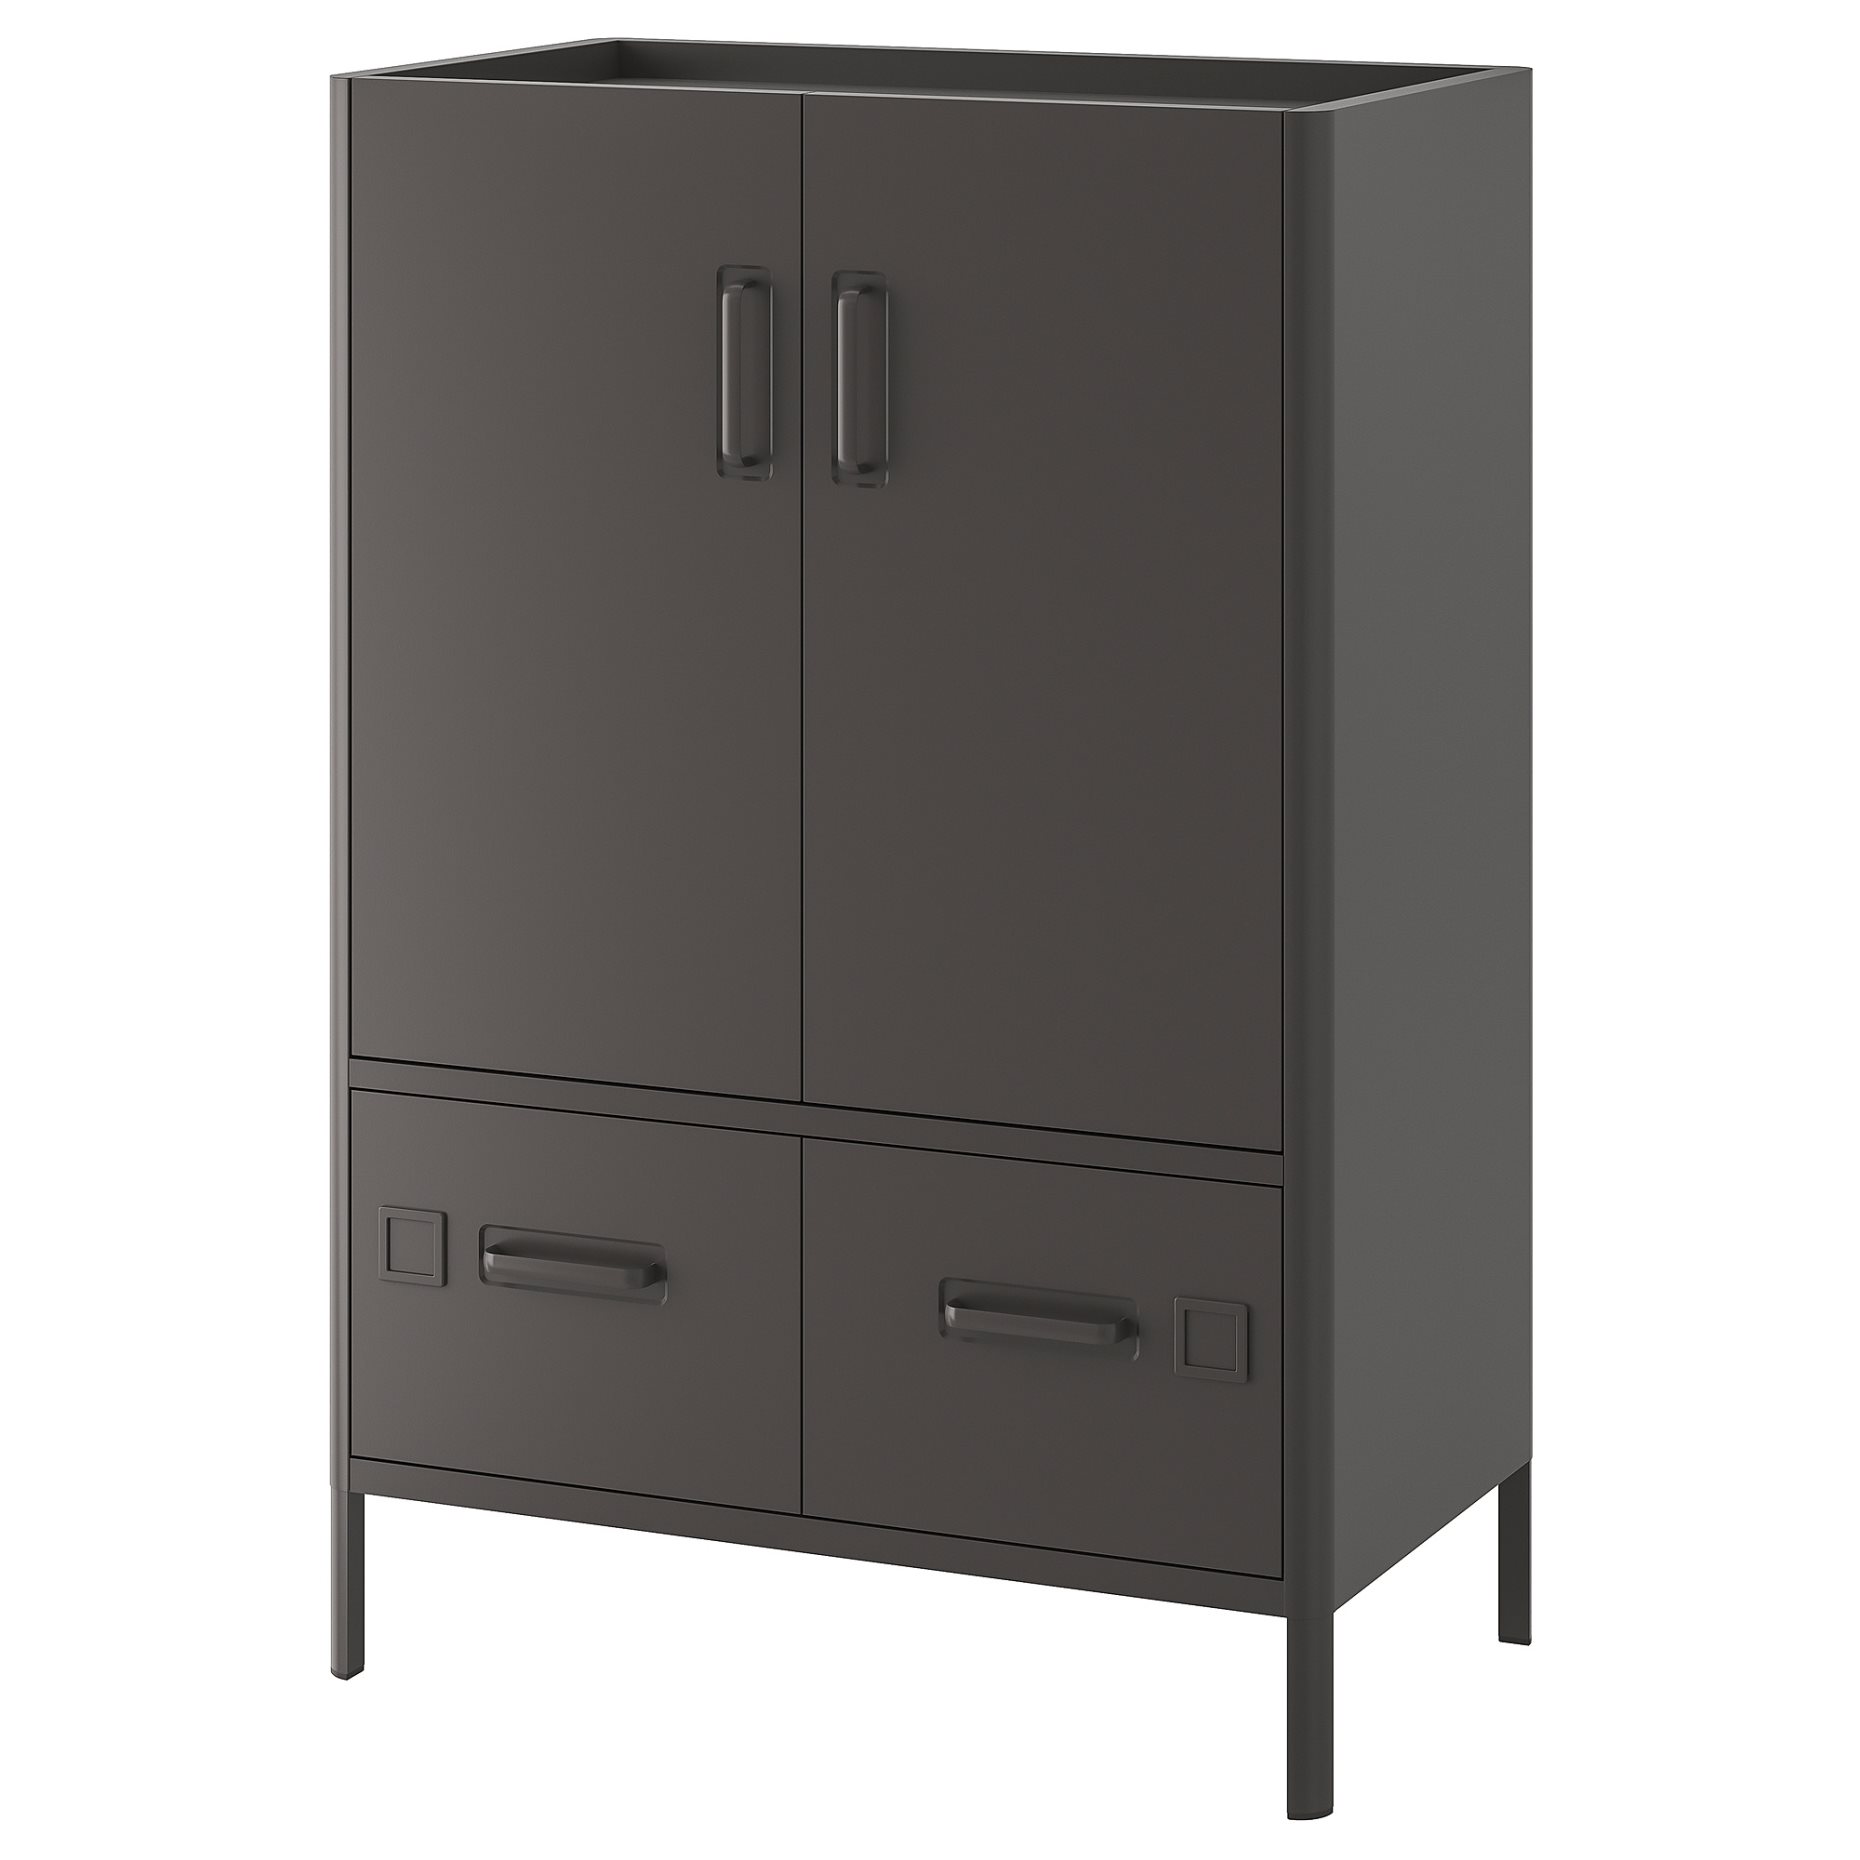 IDASEN, cabinet with doors and drawers, 80x47x119 cm, 504.963.81